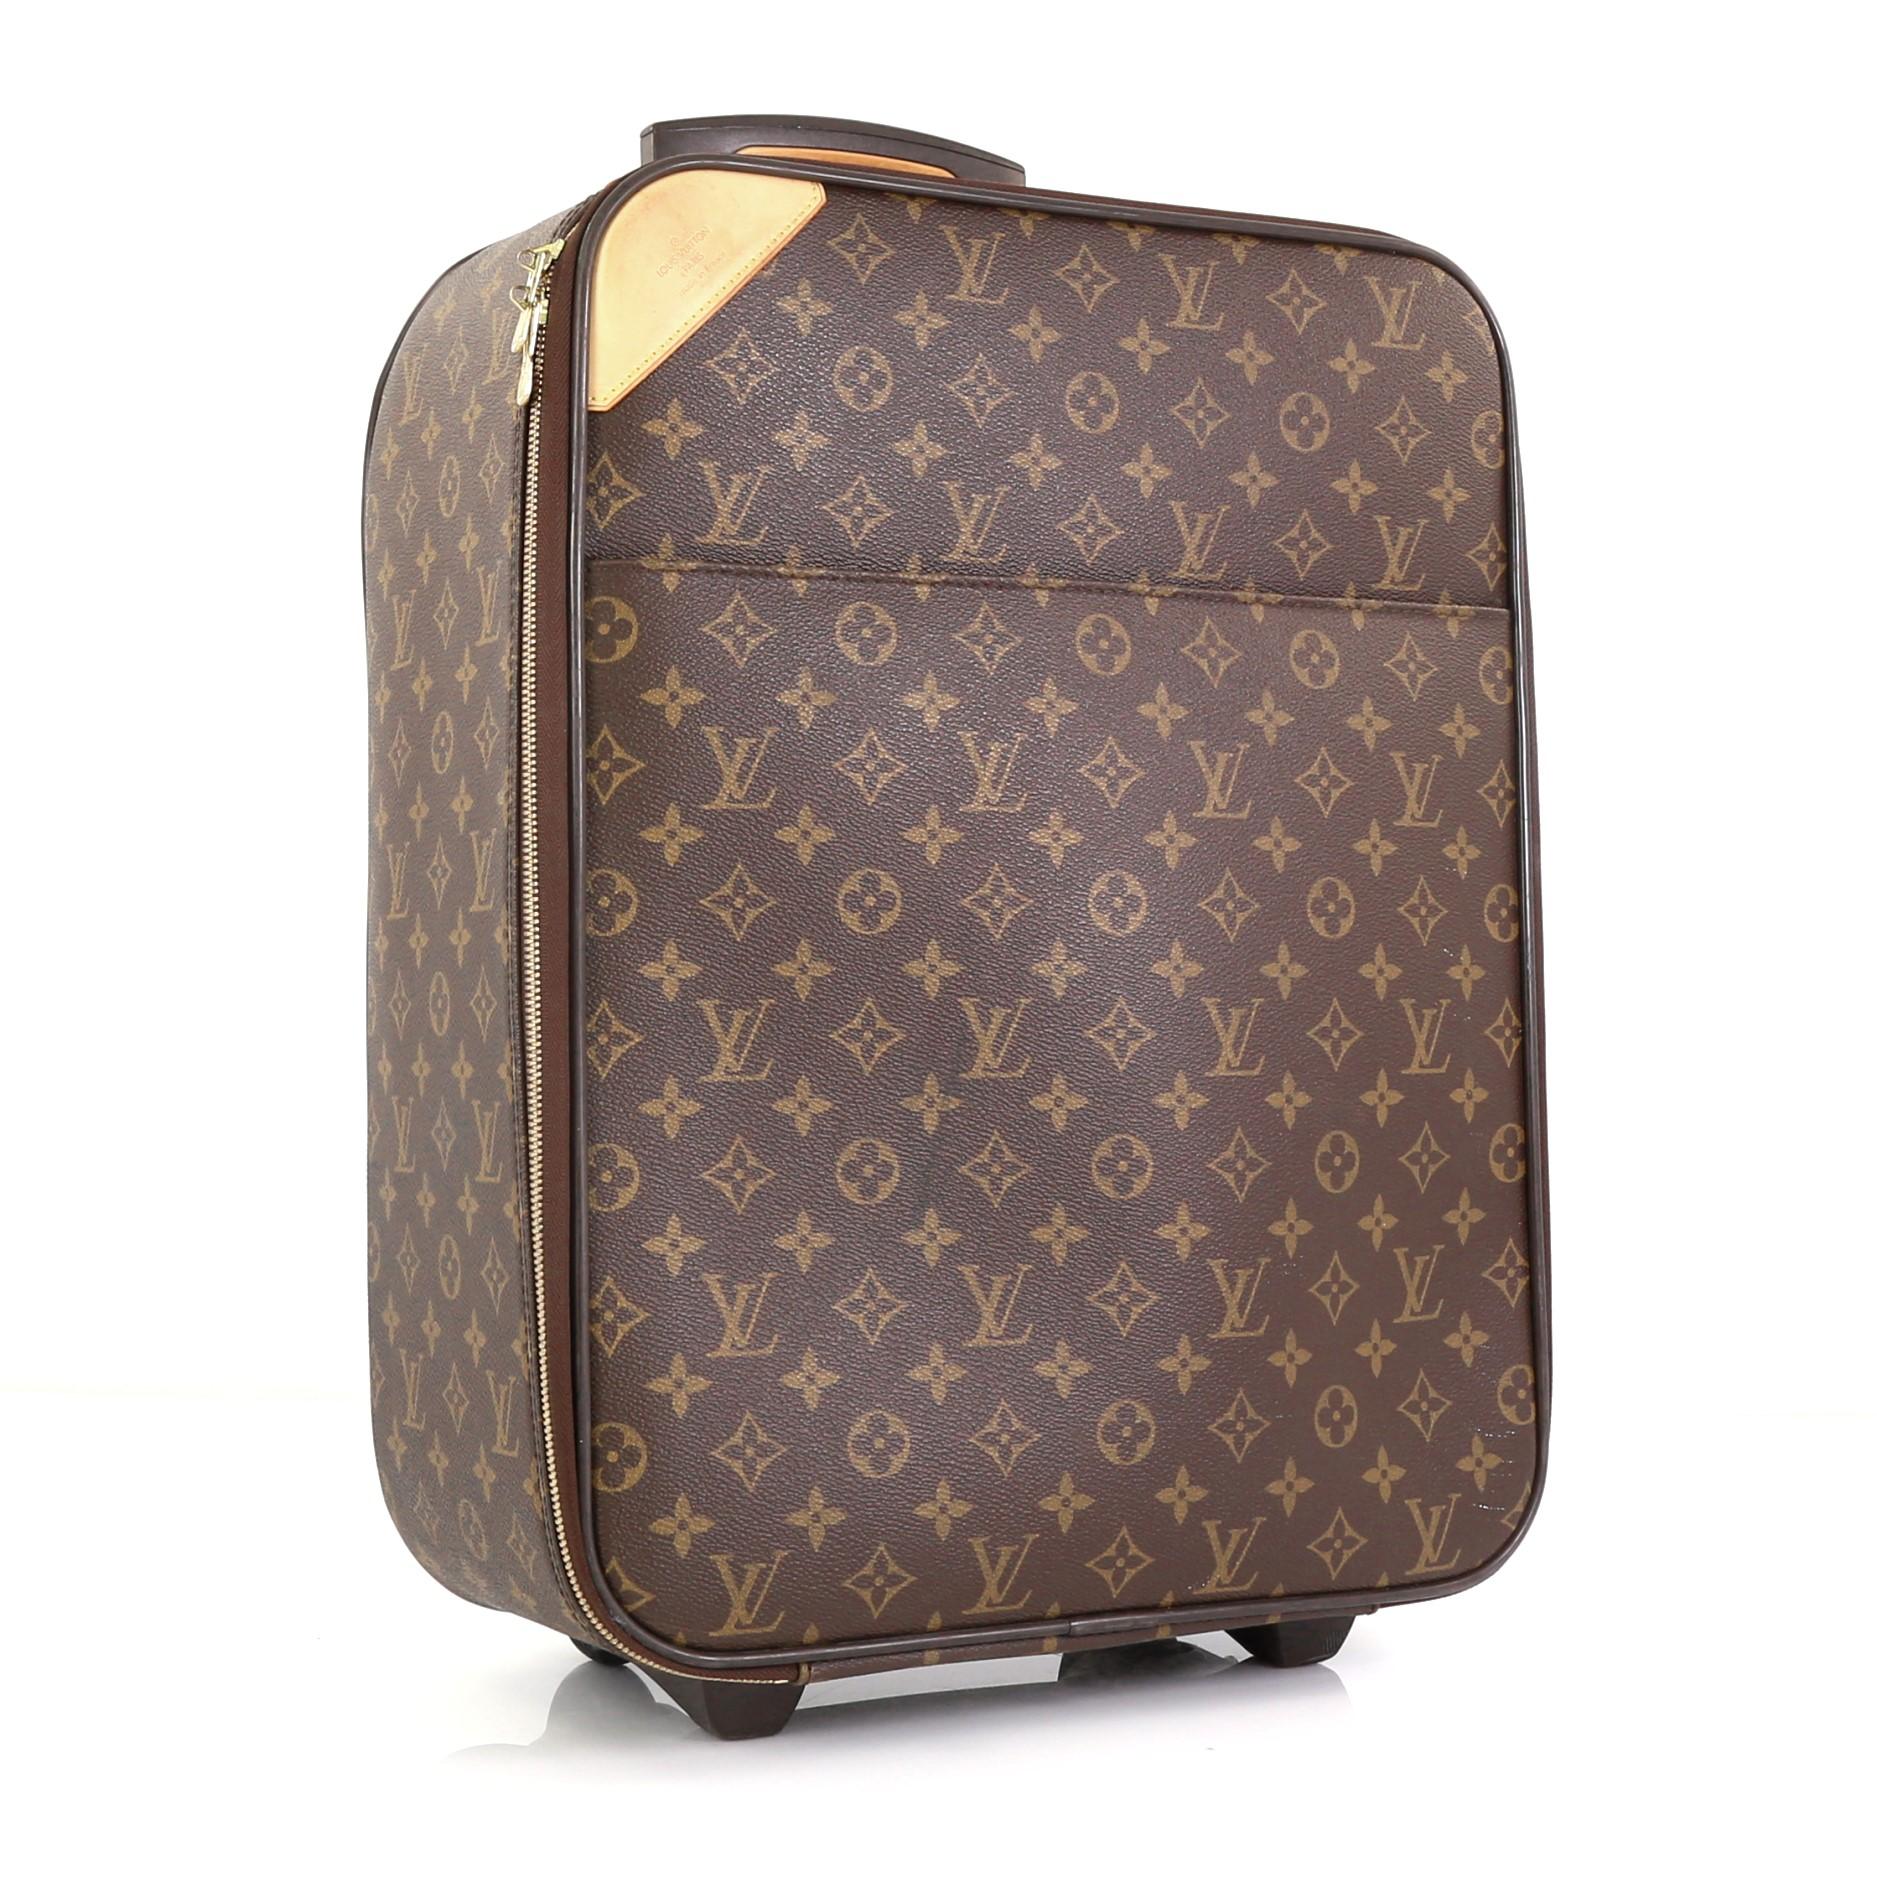 This Louis Vuitton Pegase Luggage Monogram Canvas 45, crafted from brown monogram coated canvas, features a retractable handle with lock button and rolling system, cowhide leather trim, and gold-tone hardware. Its all-around zipper closure opens to